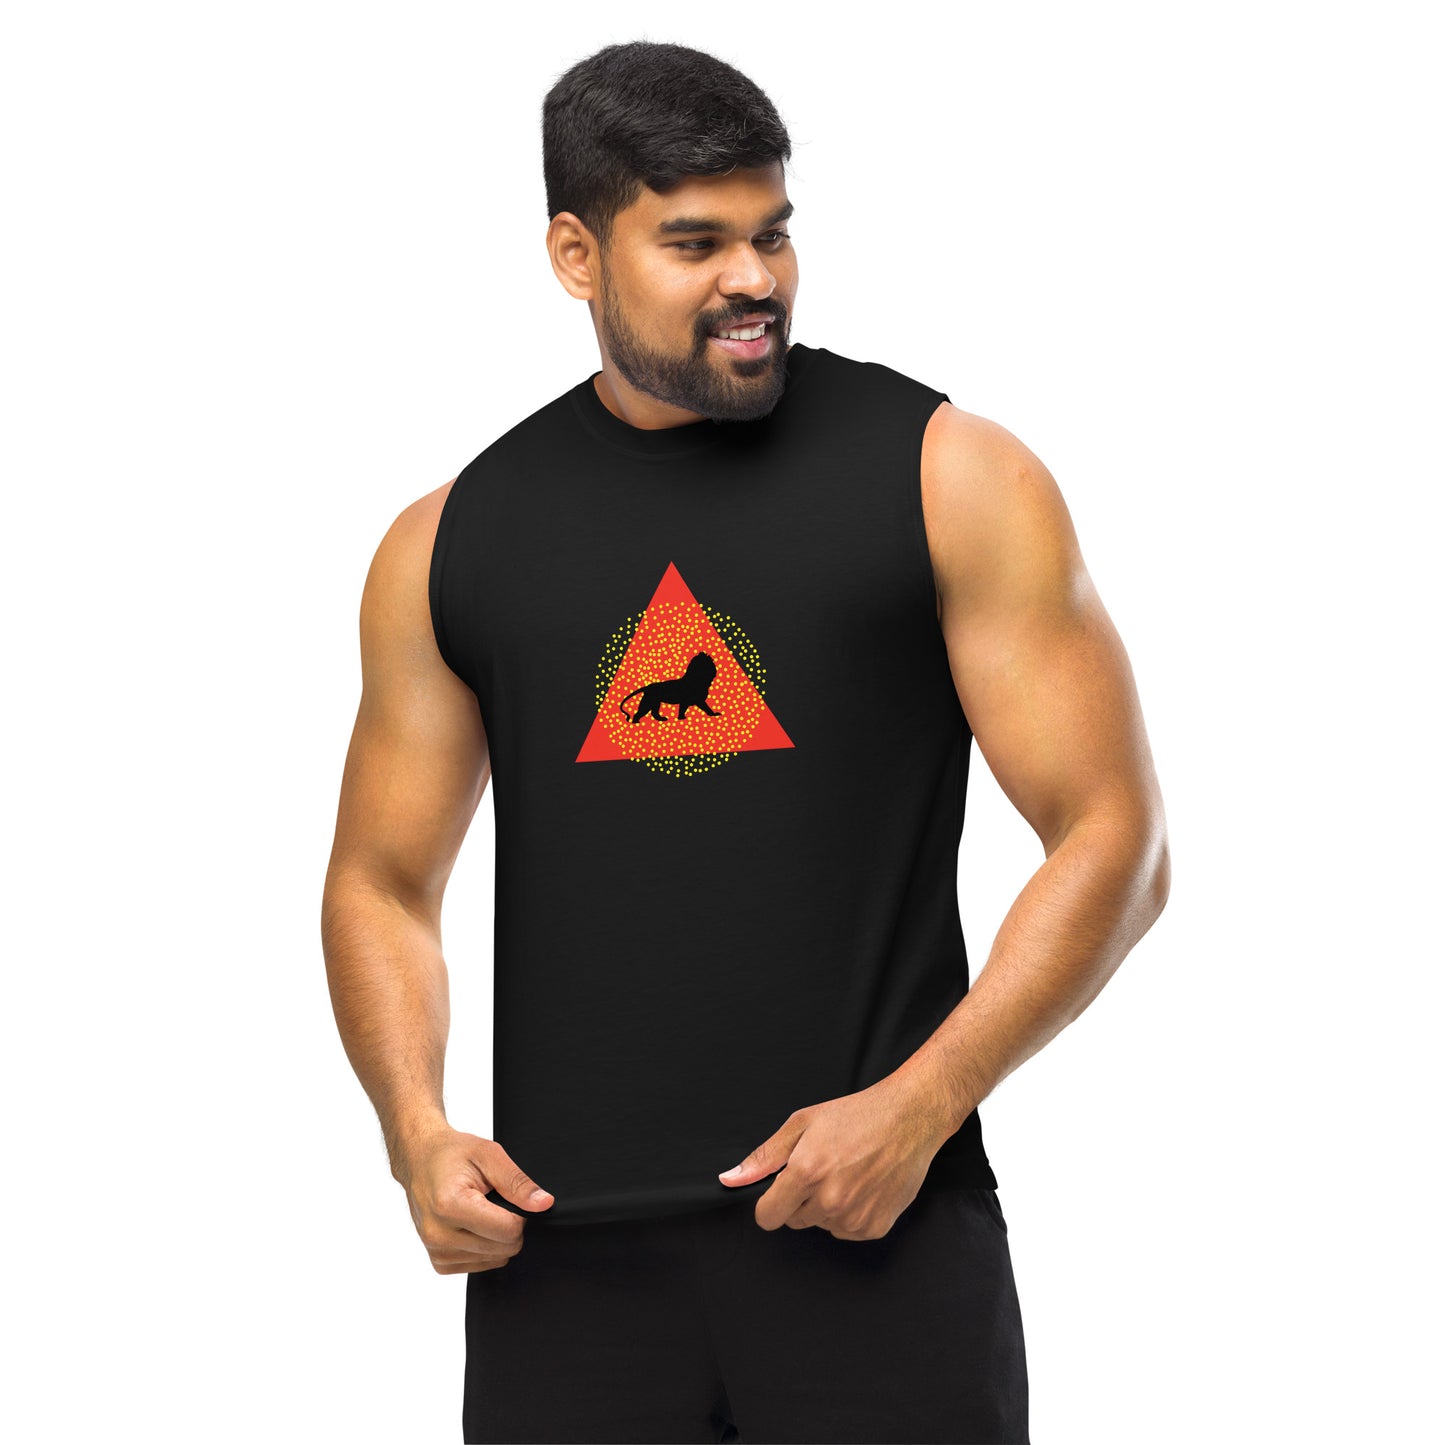 CENTER YOURSELF Muscle Shirt